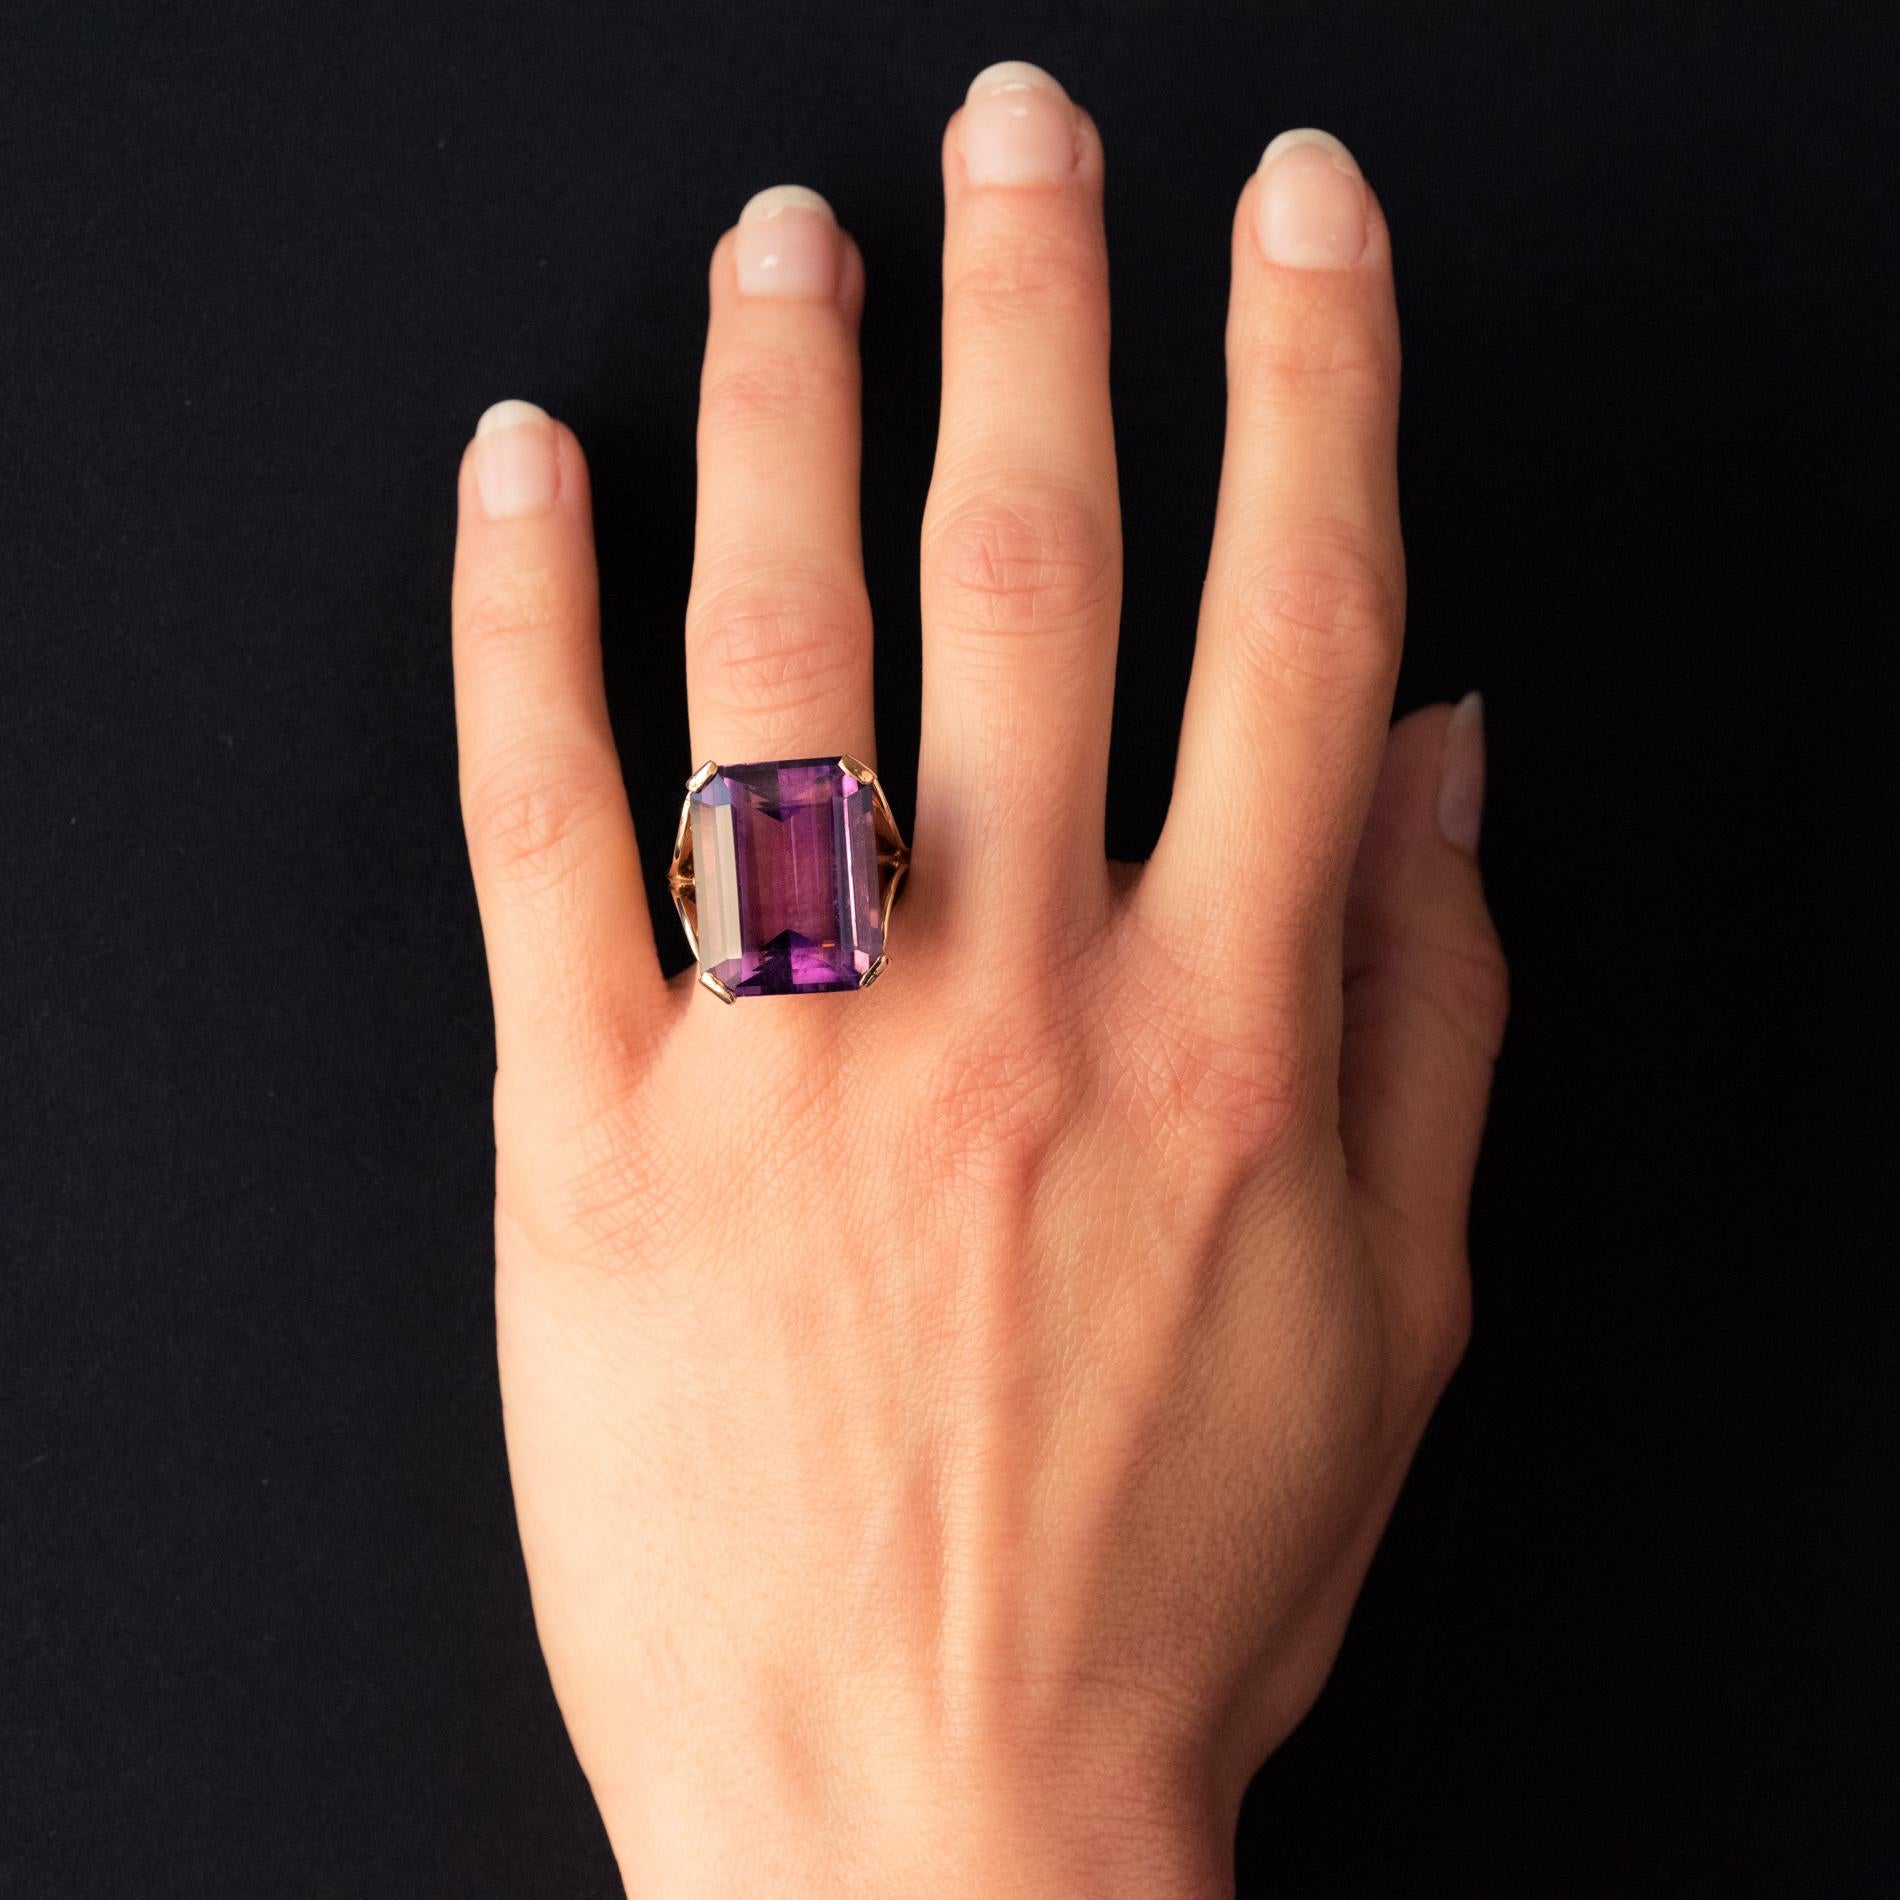 Ring in 18 karat yellow gold.
Important retro ring, its setting is formed by 2 x 2 large gold palmettes extended by 4 flat claws which hold an emerald-cut amethyst. The setting and the basket are perforated to let the light come under the gem and